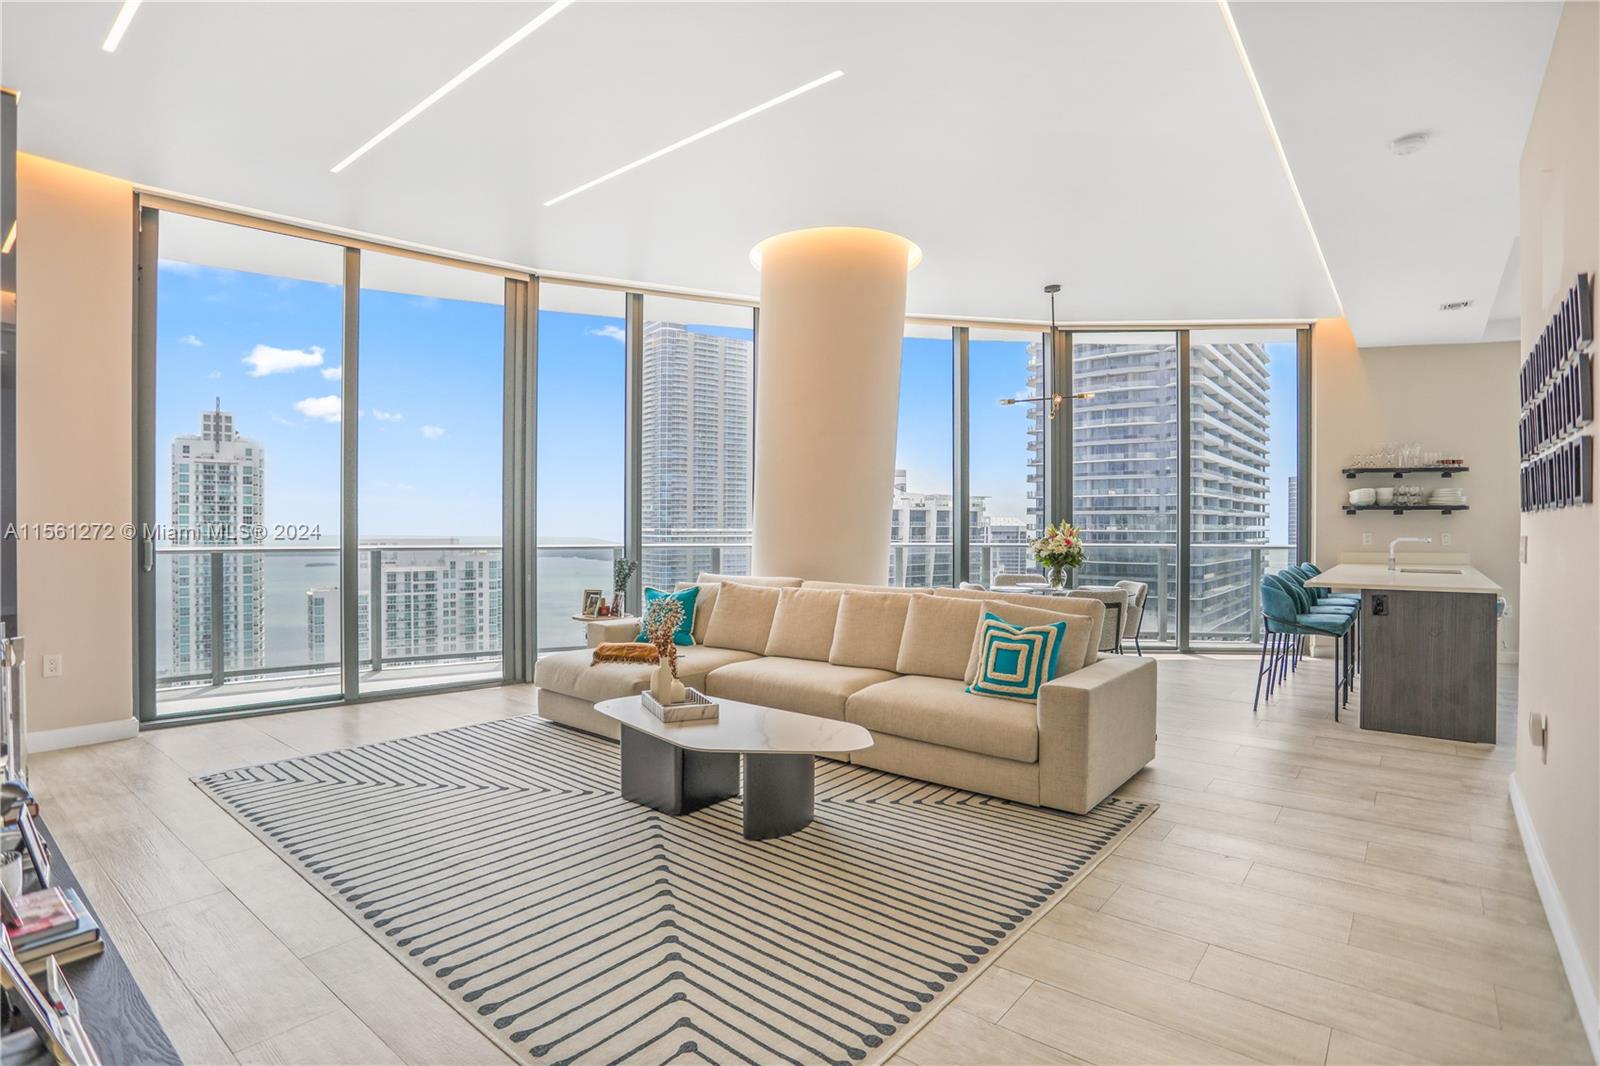 Experience luxury living in this Lower Penthouse Unit located in the heart of Brickell. Enjoy expansive views spanning from Downtown to Coconut Grove from your spacious wrap-around balcony w/ 4 points of entry. This unit boasts custom woodwork throughout, including a foyer partition, custom kitchen cabinetry, hand-carved TV wall unit from Europe. The solid wood doors add a touch of elegance to this already stunning 2/2 plus den unit. Technology features include an automatic Somfy shade system throughout & custom overhead LED lighting with individual remote control dimmers for all rooms. This PH with 11ft Ceilings is different from the other 03 line units. The master bedroom is wrapped in luxurious Goldflake wallpaper from Italy.